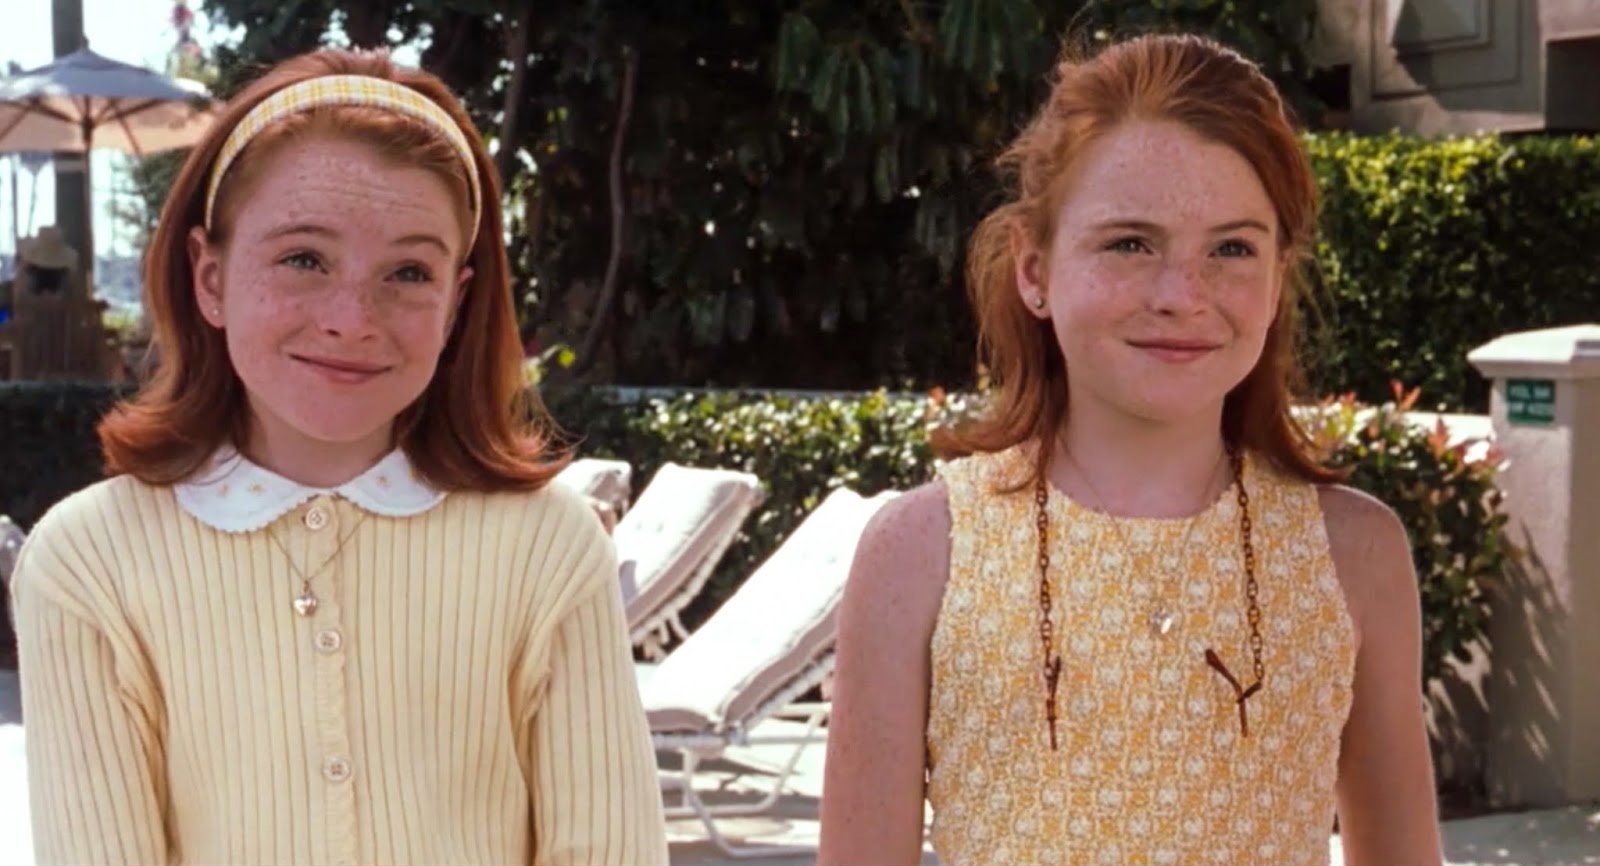 Let's dress like we're in The Parent Trap - Nikki McMullen